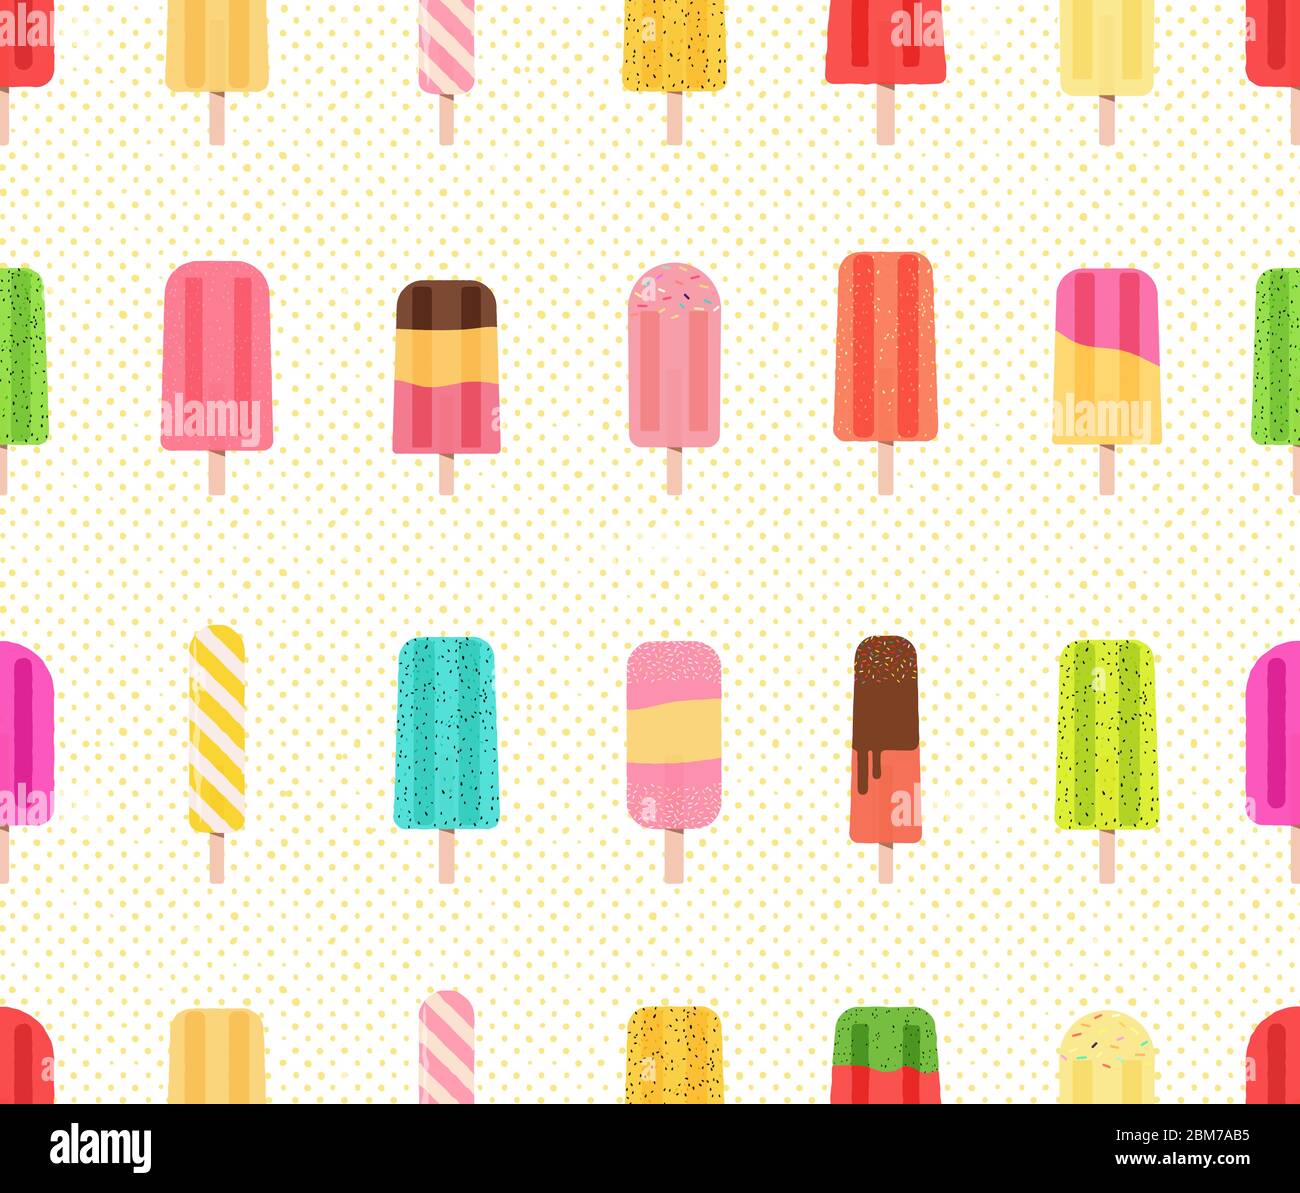 Seamless pattern with colorful ice pops on white background with small yellow polka dots. Collection of fruit popsicles. Stock Vector